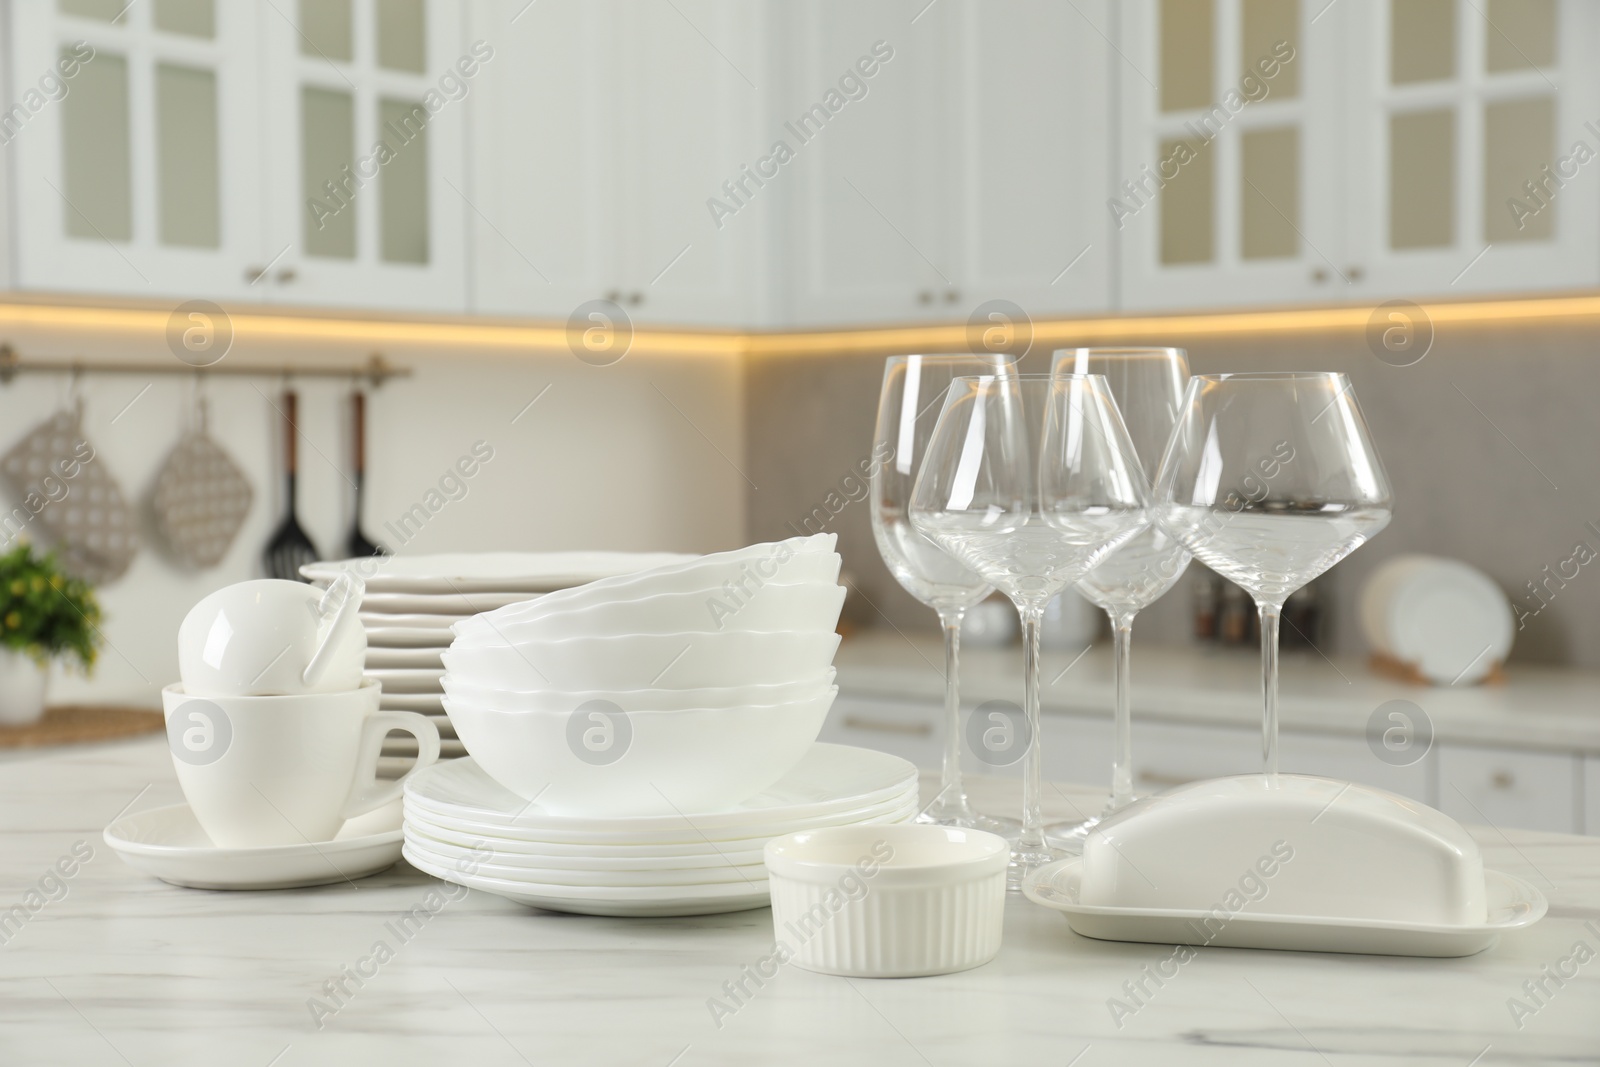 Photo of Clean plates, bowls, cups and glasses on white marble table in kitchen